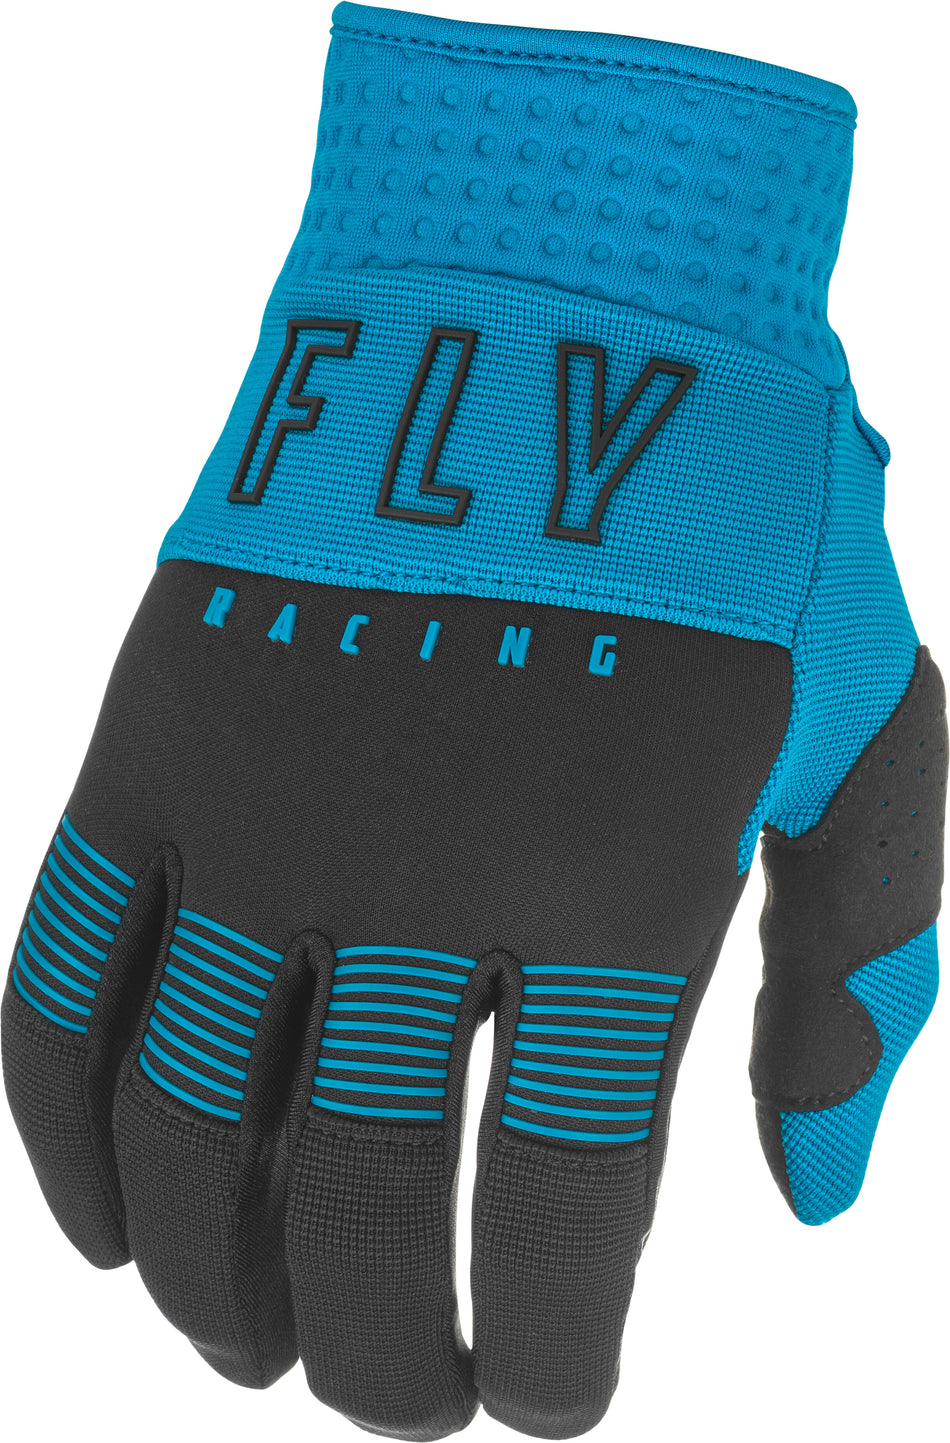 FLY RACING Youth F-16 Gloves Blue/Black Sz 06 374-91106